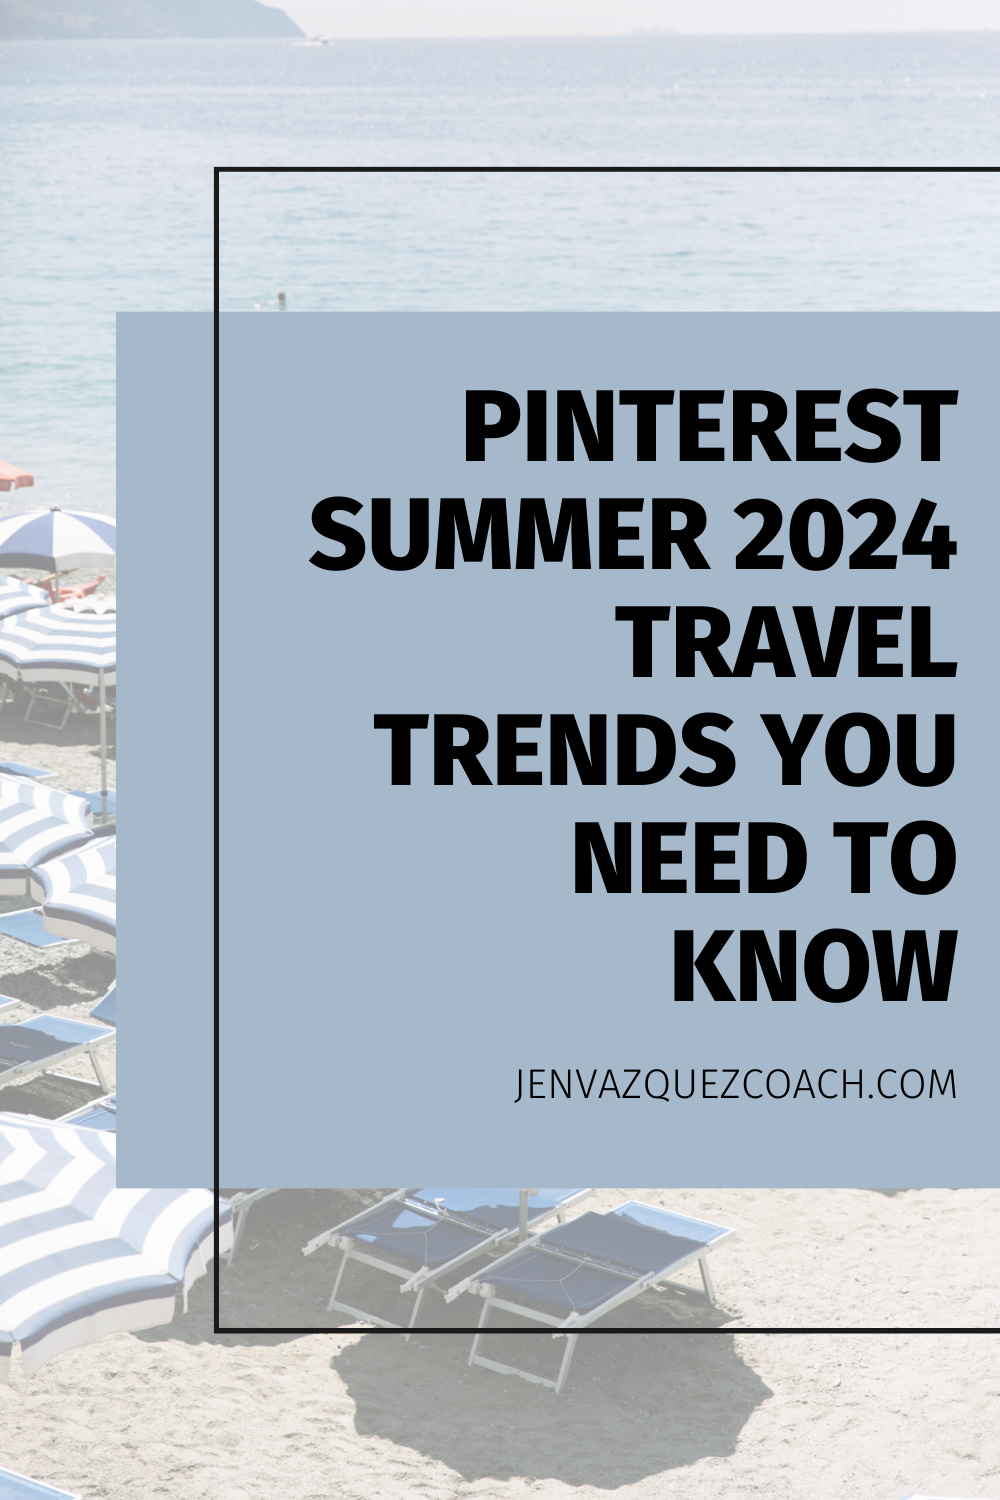 image of blue and white umbrellas on a beach and text 2024 Travel Trends on Pinterest Adventure, Wellness & More